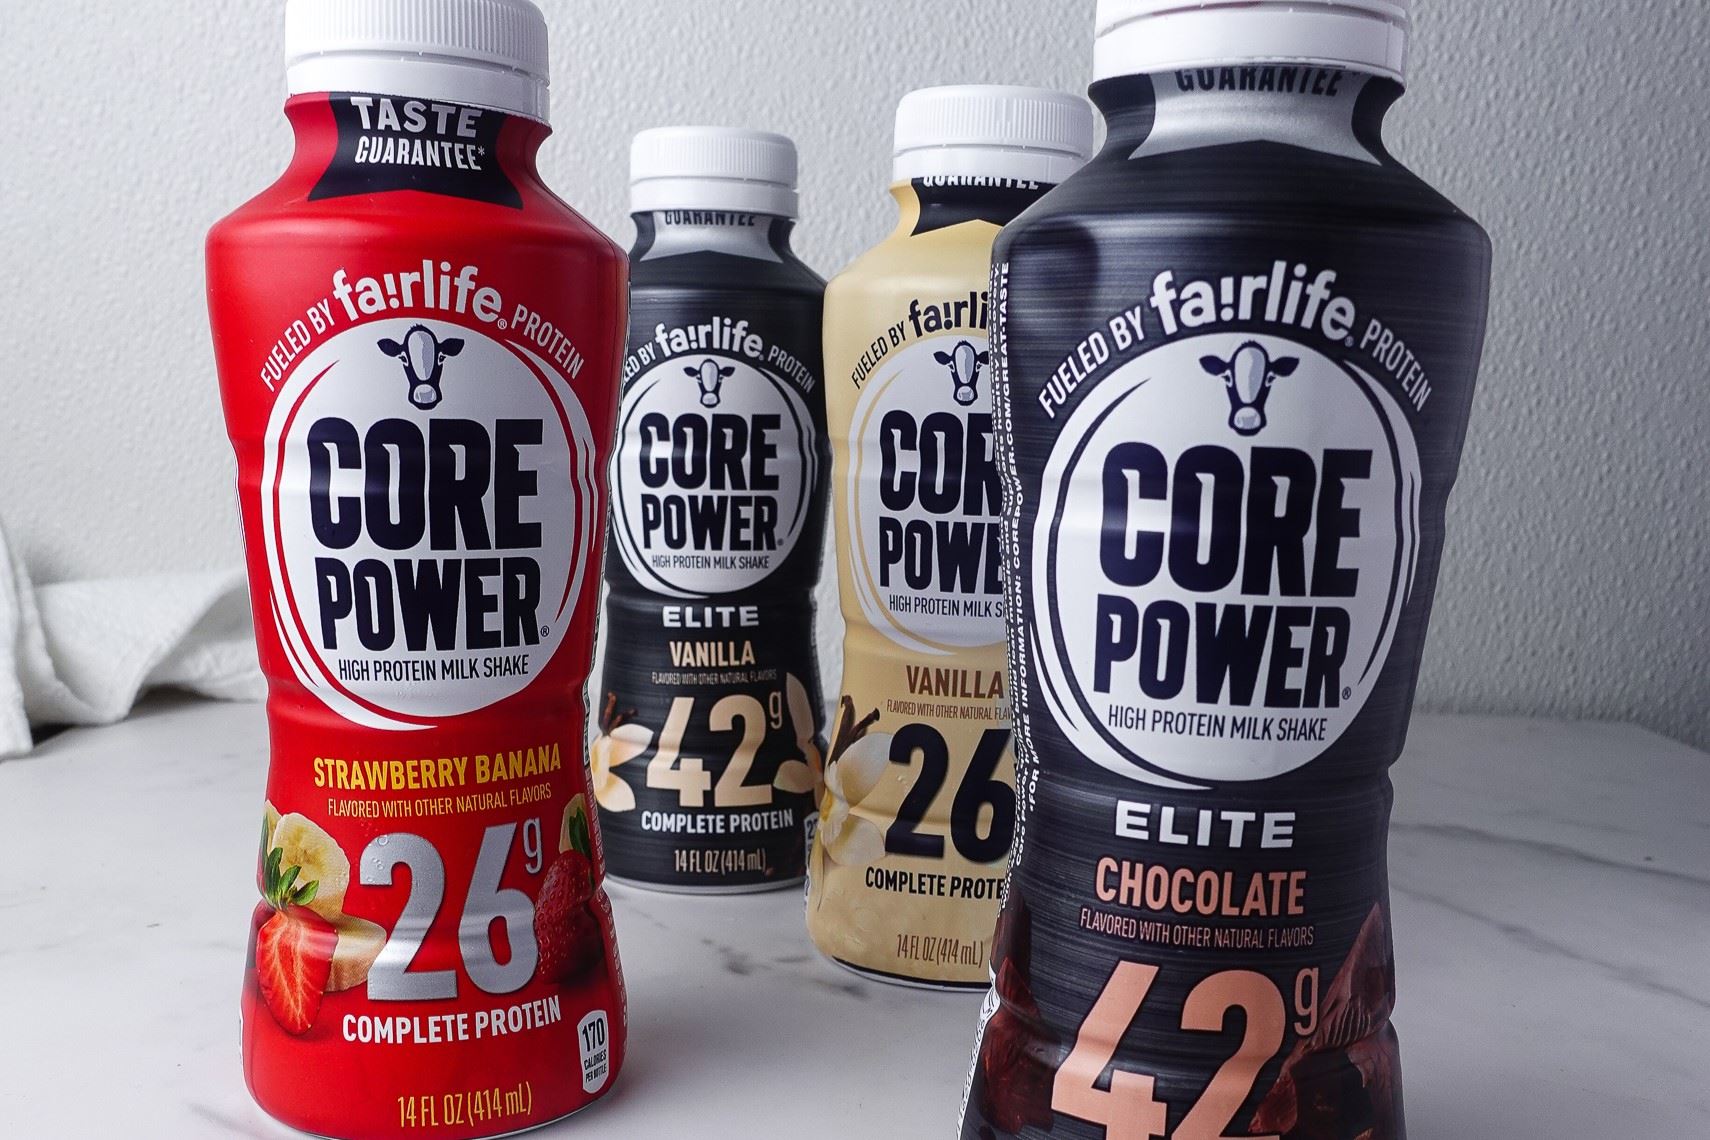 10-core-power-nutrition-facts